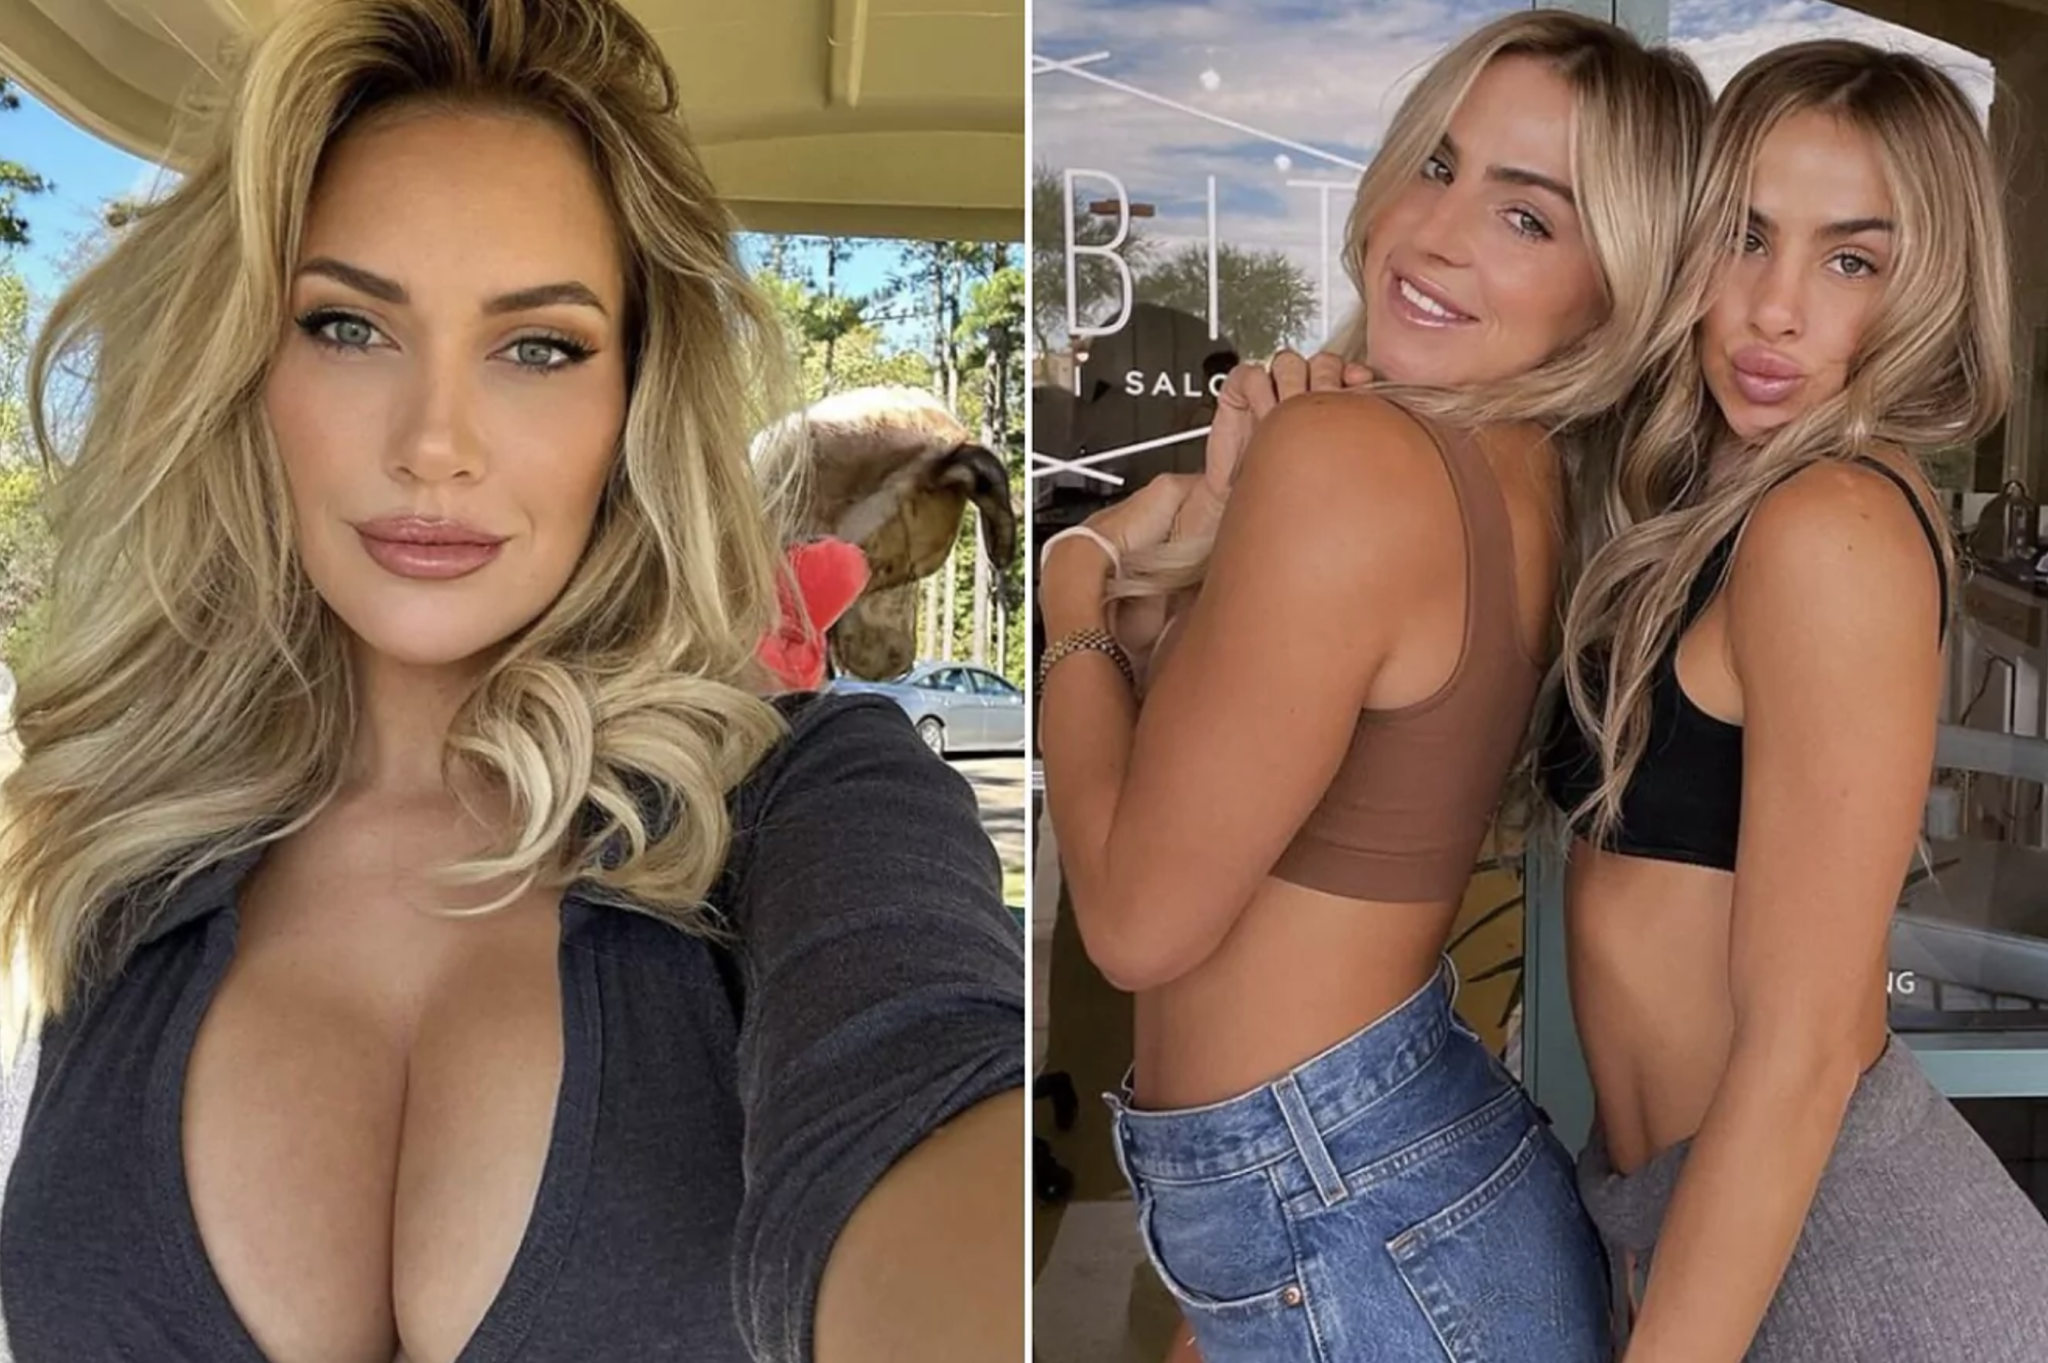 Paige Spiranac confesses her secrets to the Cavinder twins: I've always felt comfortable in almost no clothes